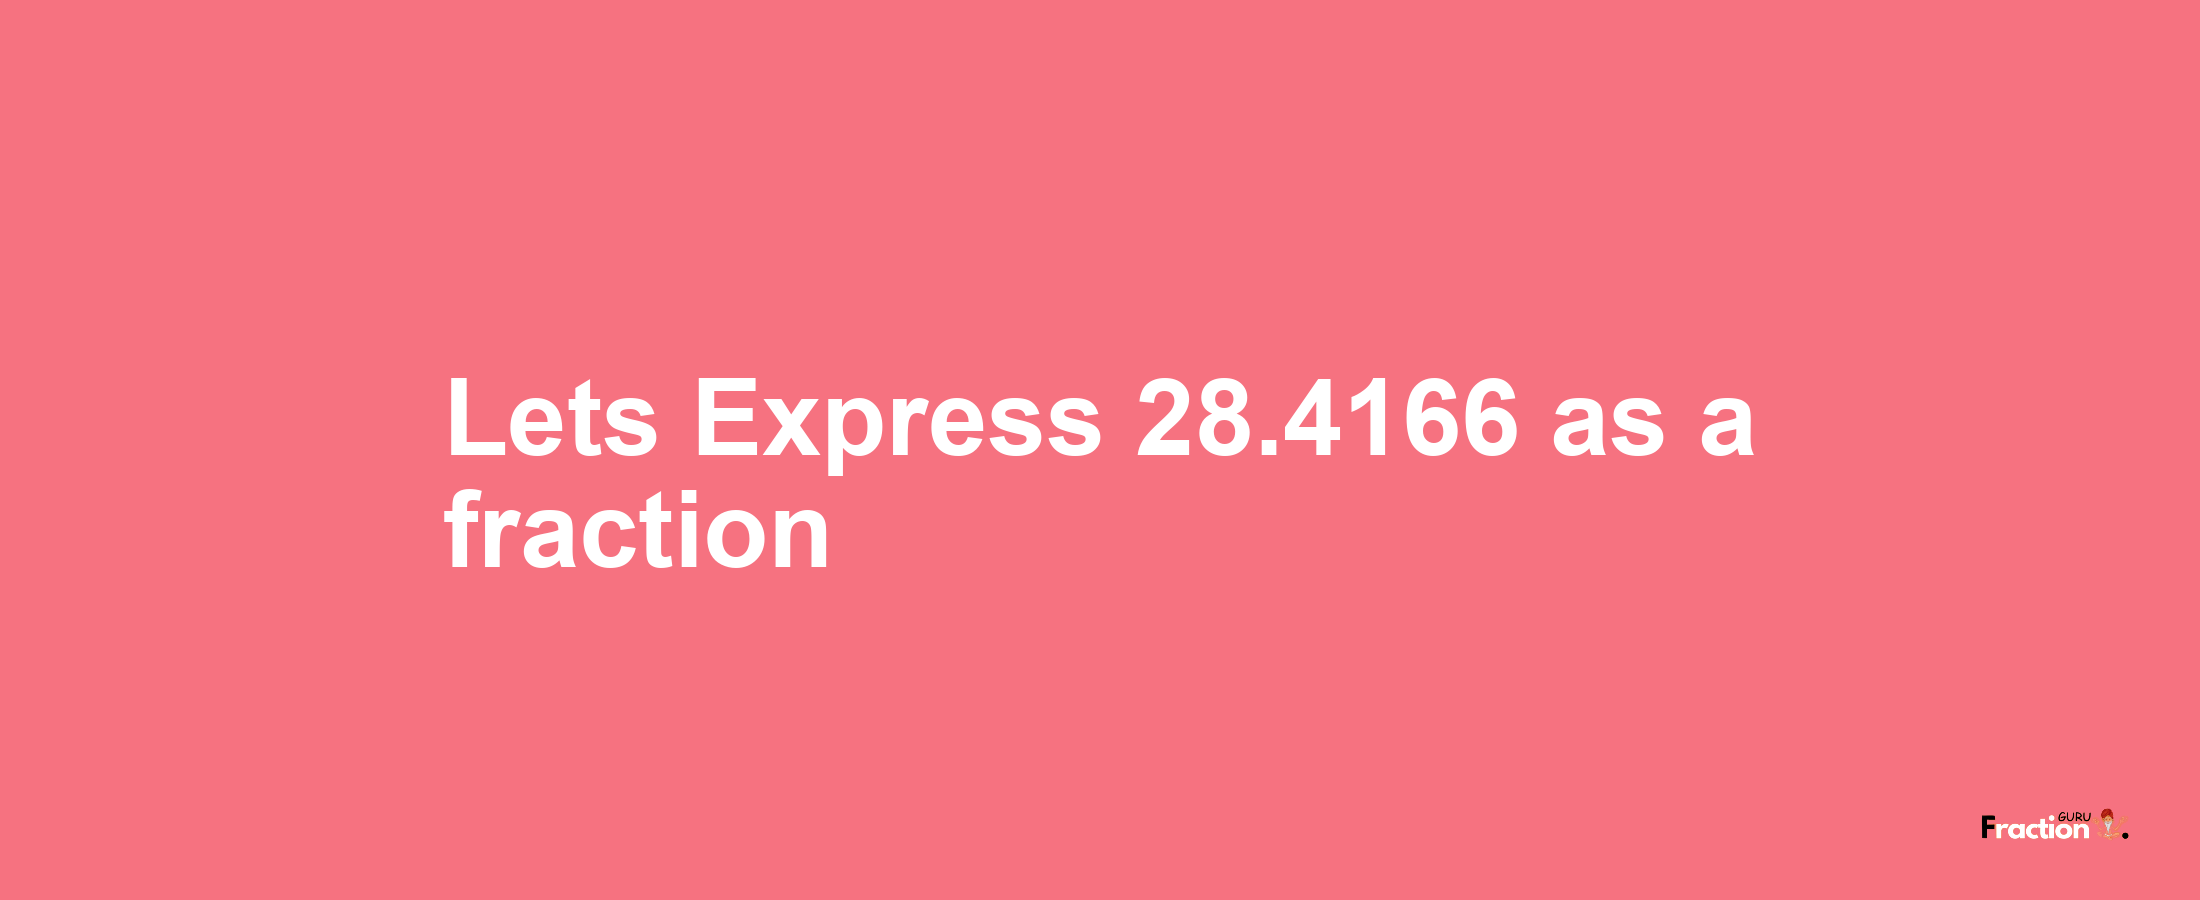 Lets Express 28.4166 as afraction